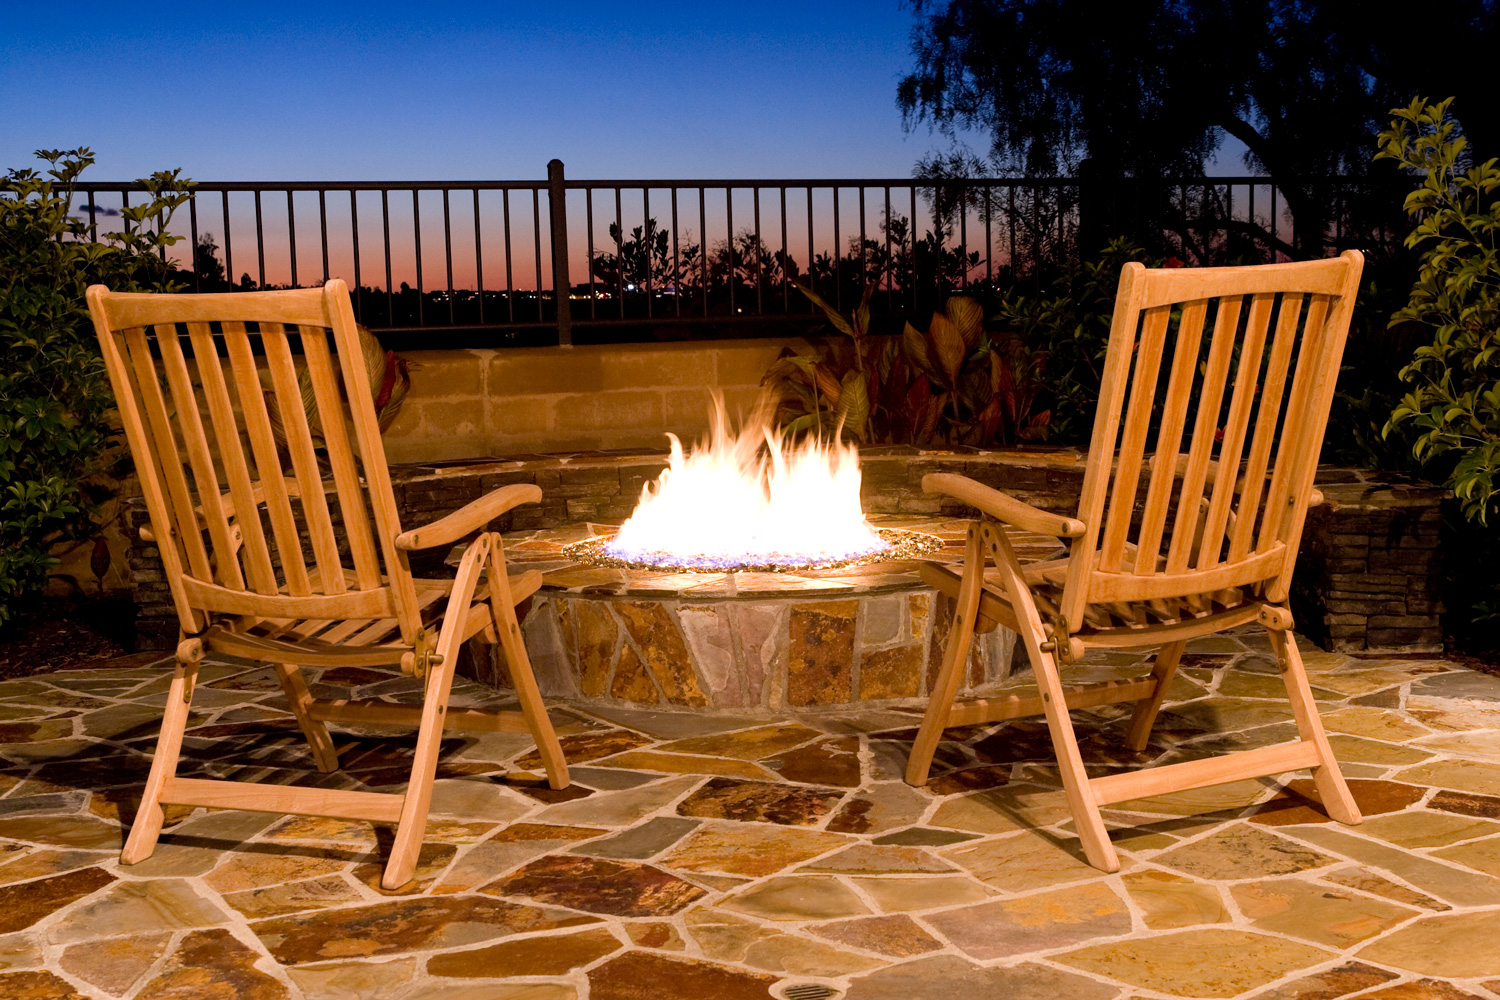 A beautiful firepit in the back yard makes for relaxing luxury. Comfortable seating areas for good conversation.